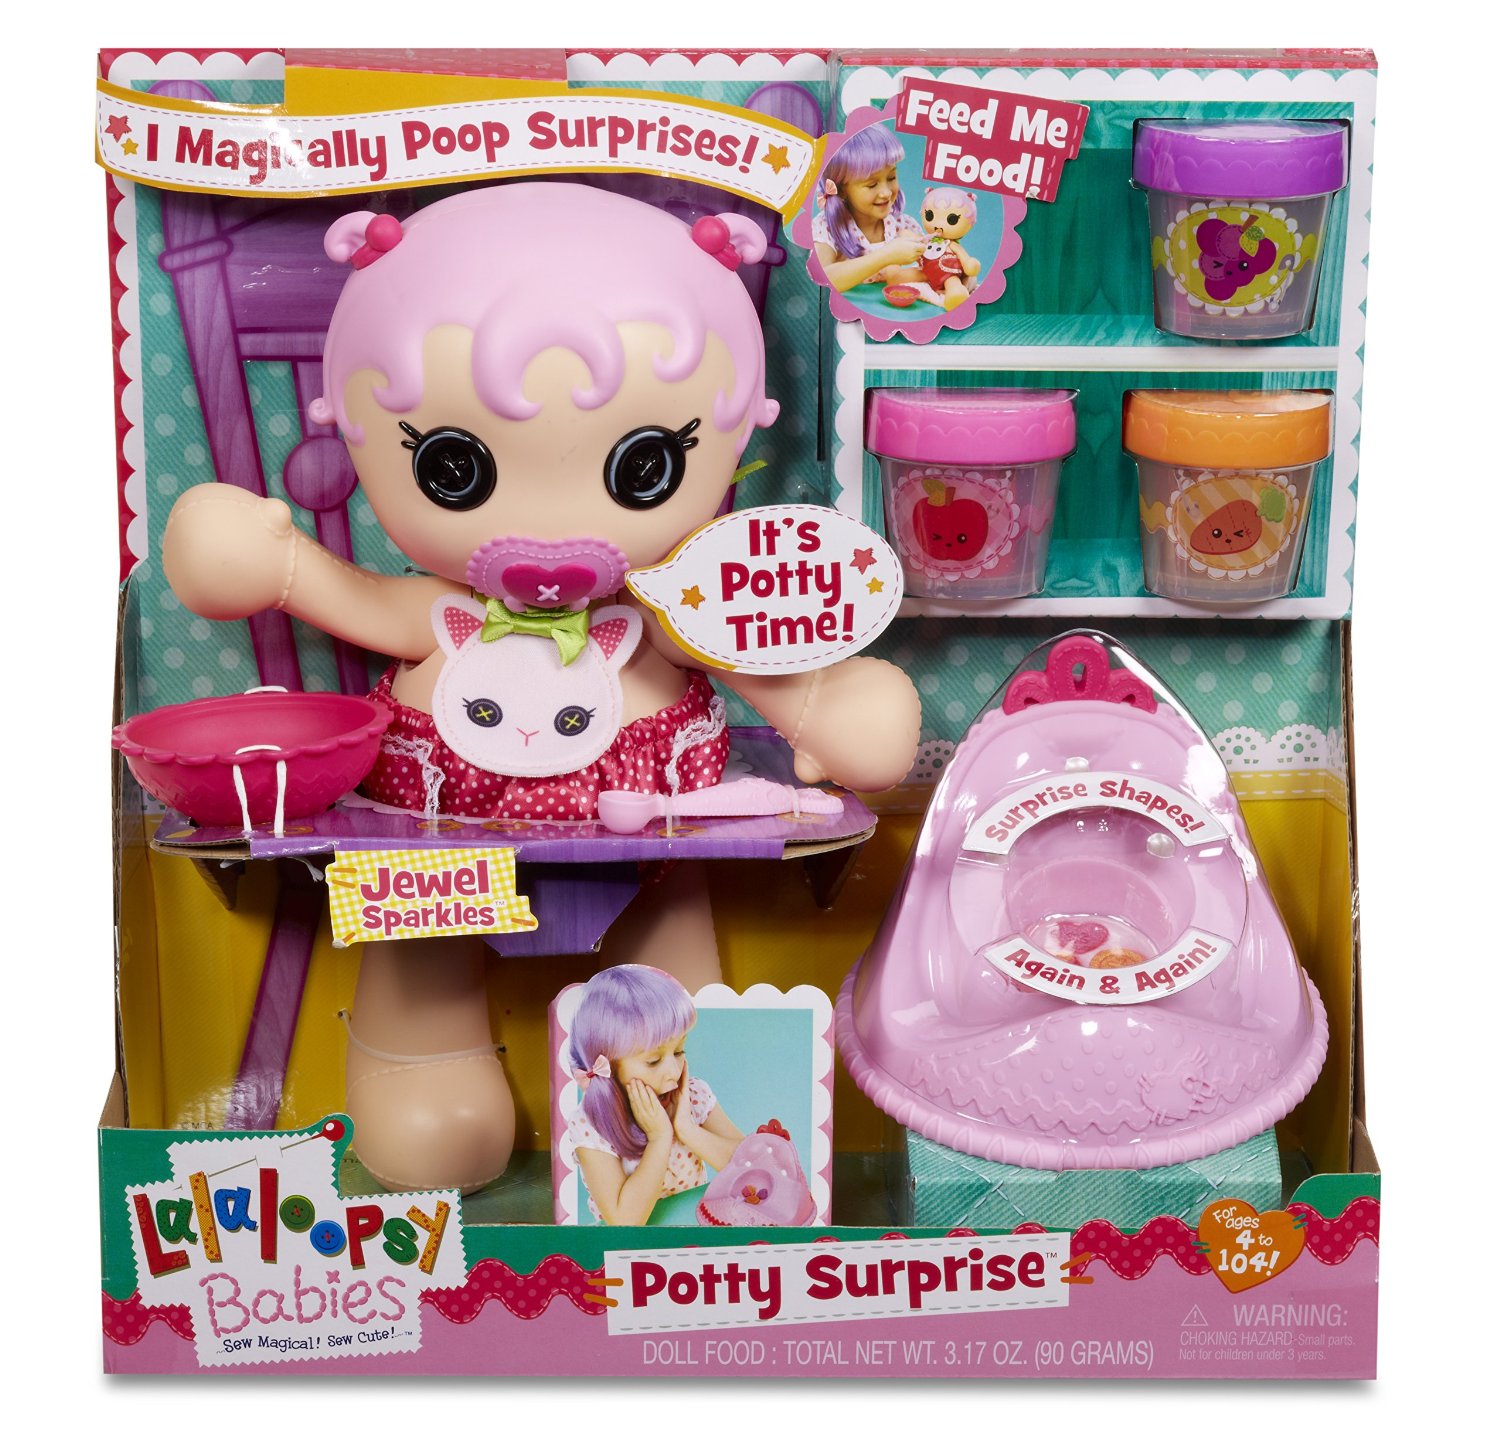 The Lalaloopsy Babies Potty Surprise Doll - The Doll That Sh**s Shapes!